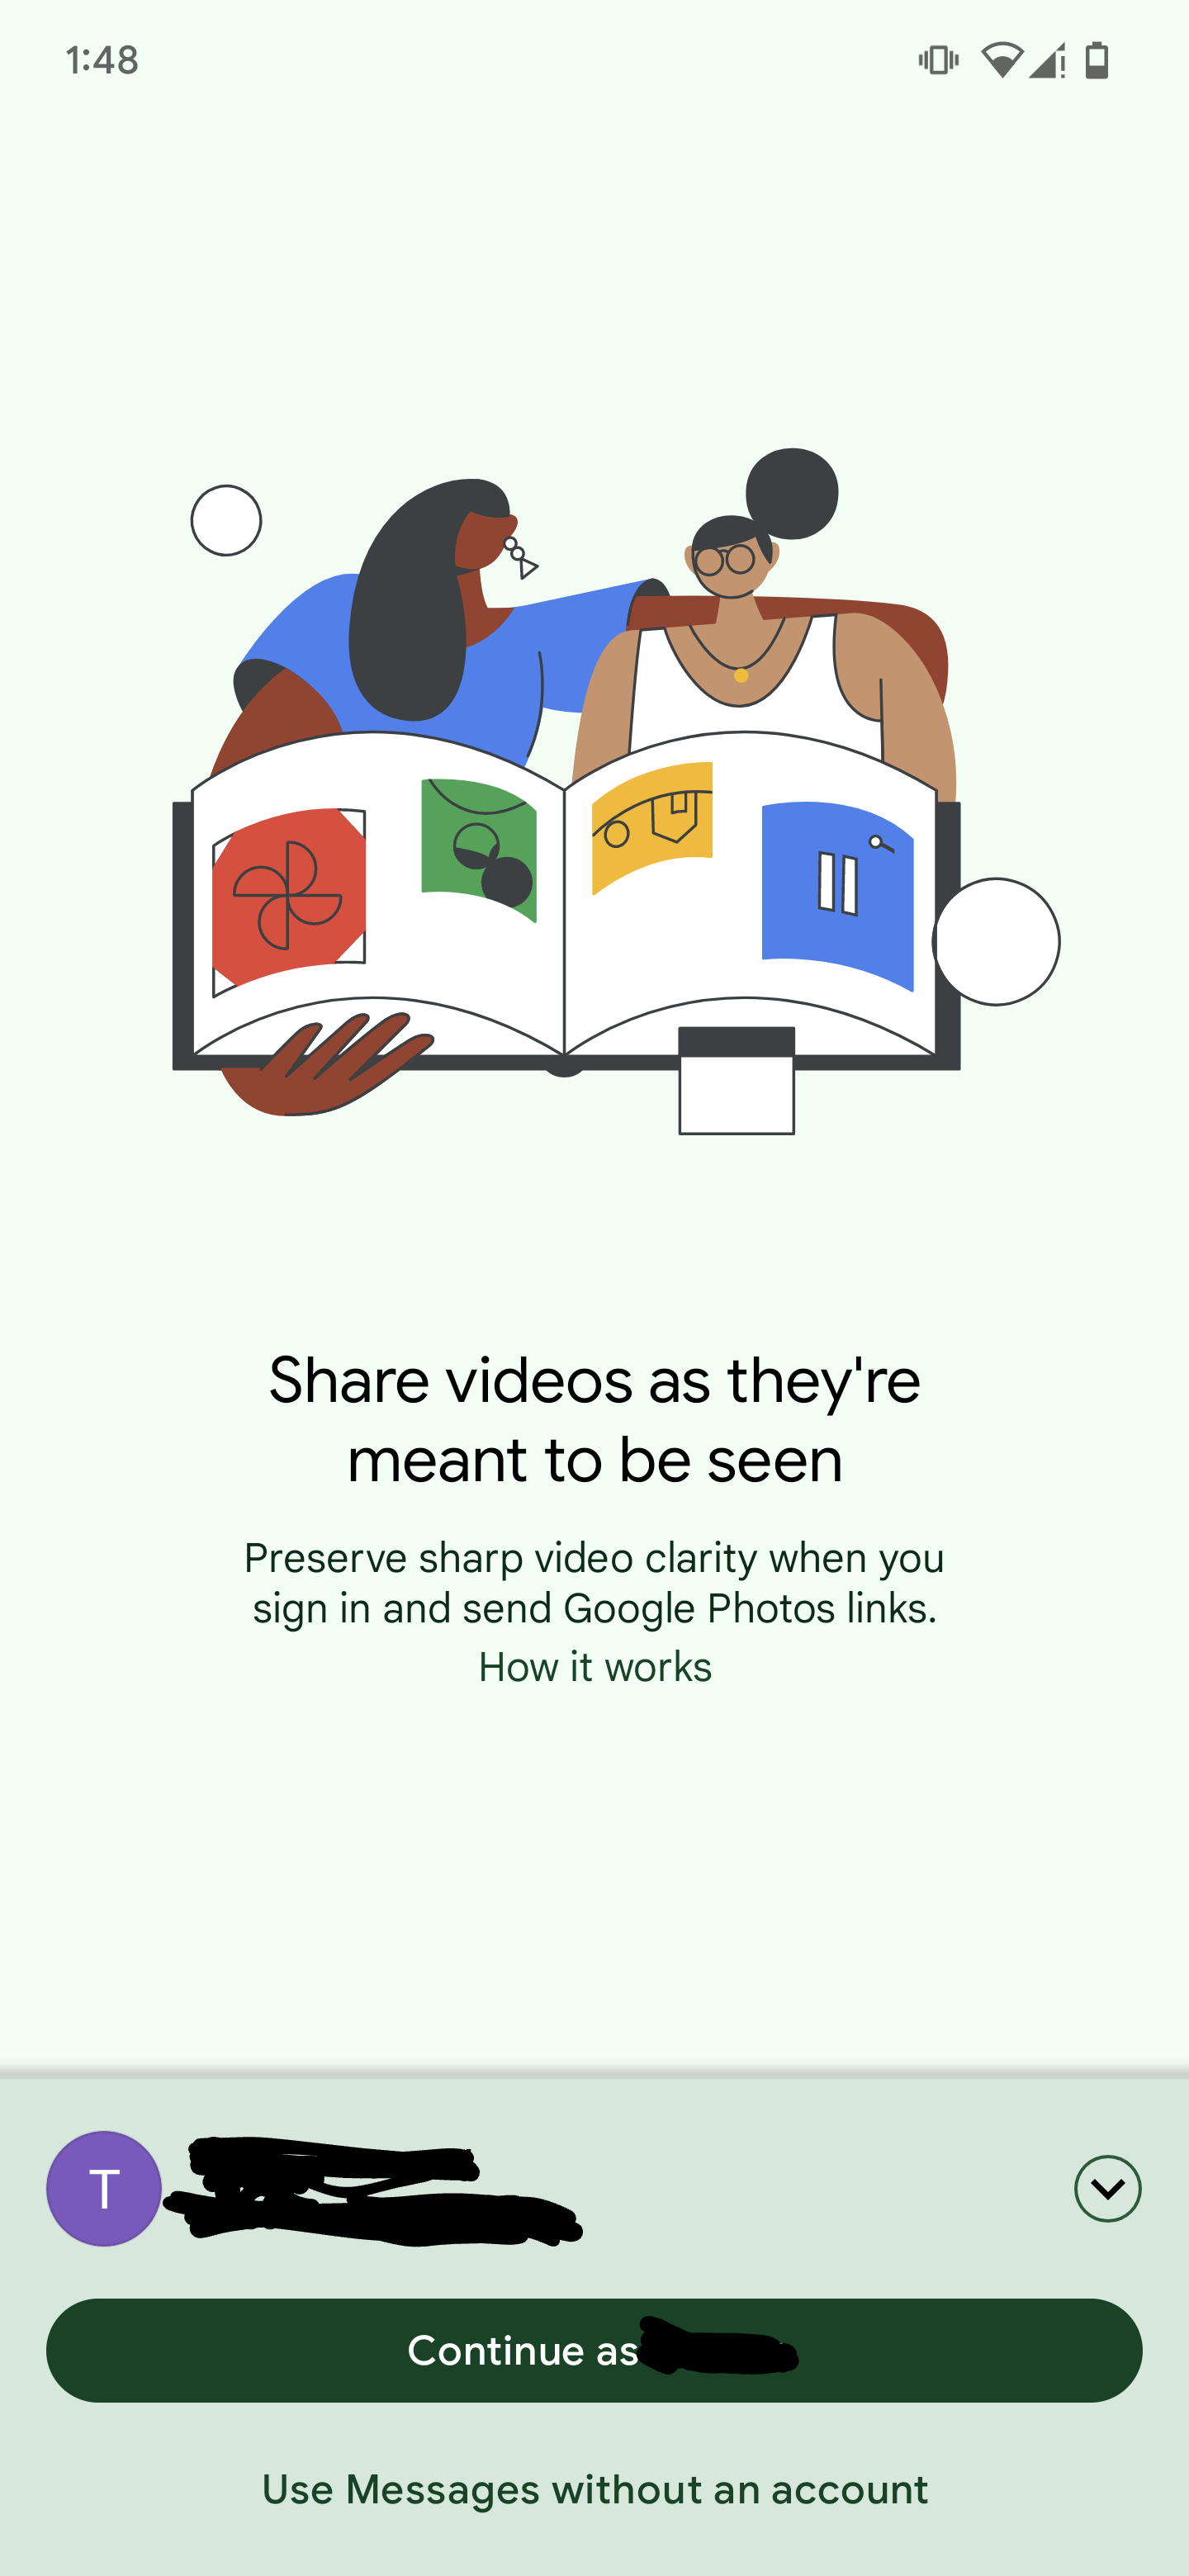 Google Photos integration in Messages